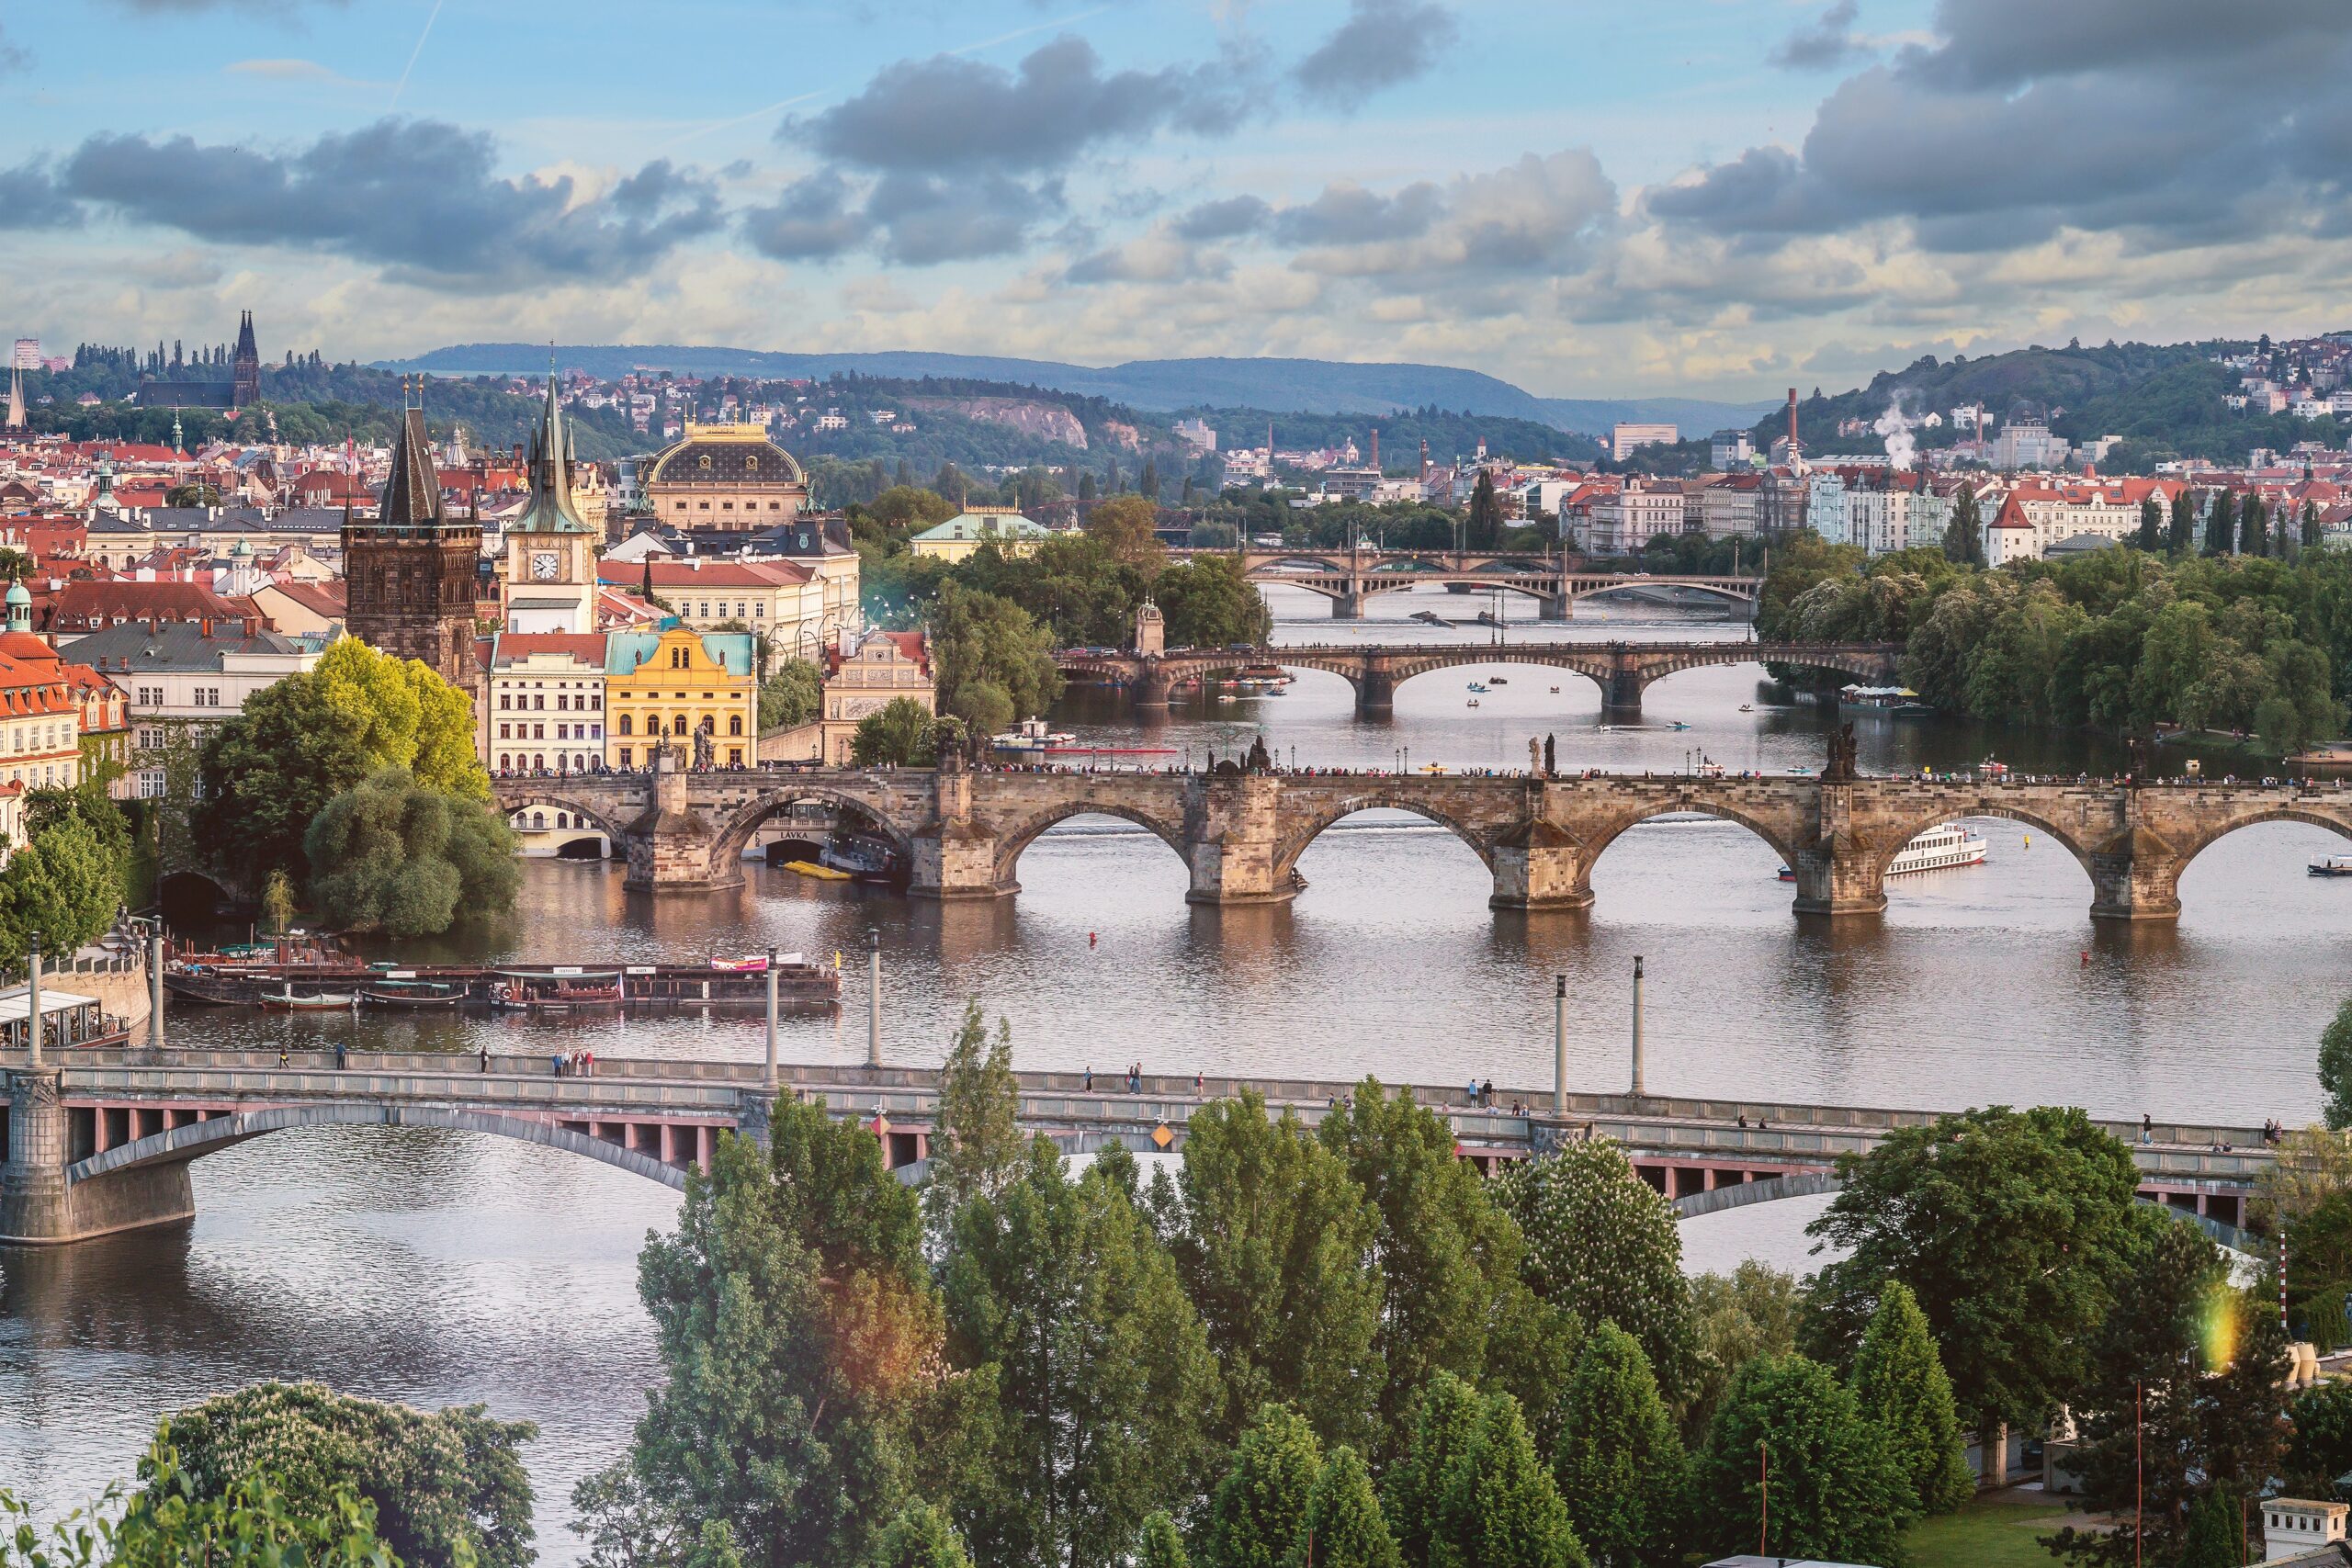 Prague, Aerial View of Concrete Bridge and Buildings Surrounded by Trees